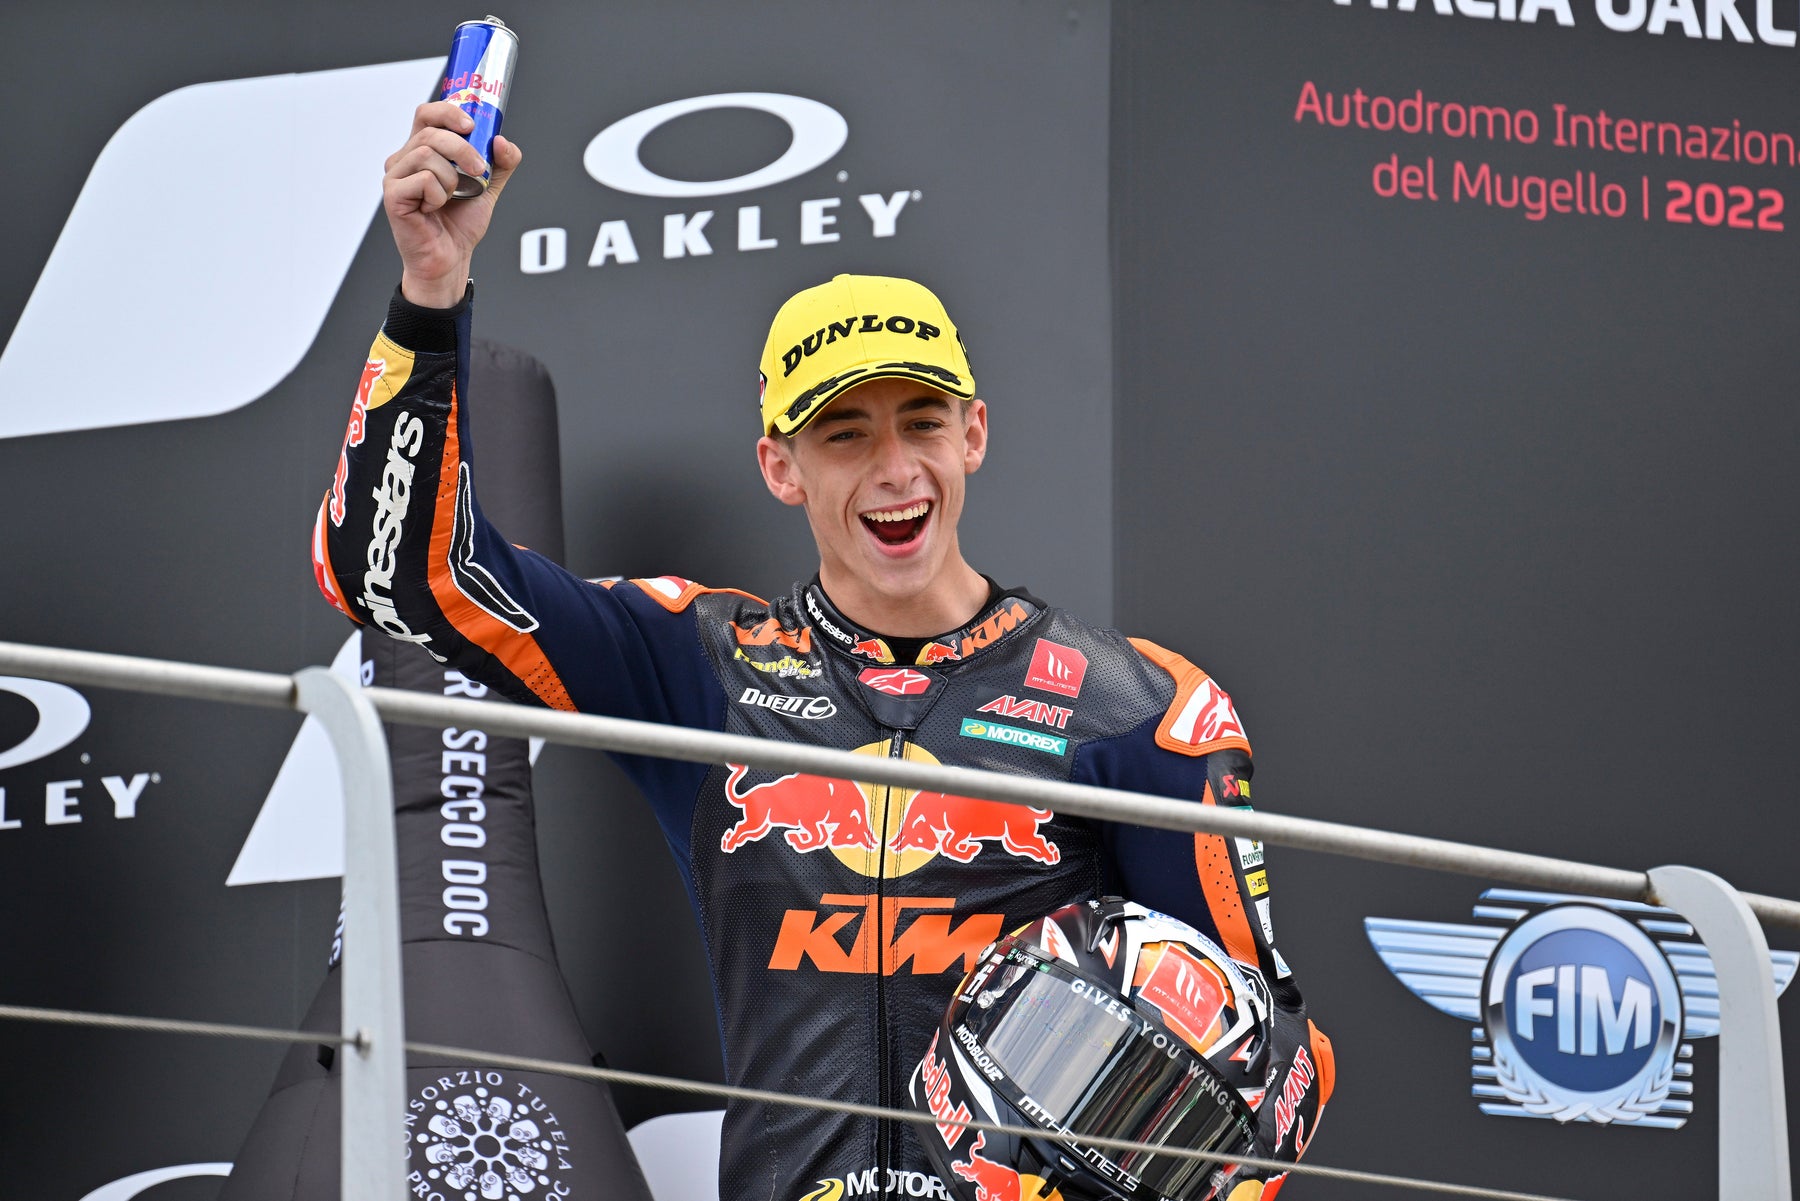 PEDRO ACOSTA SCORES FIRST MOTO2 WIN AFTER RECORD-BREAKING VICTORY IN MUGELLO